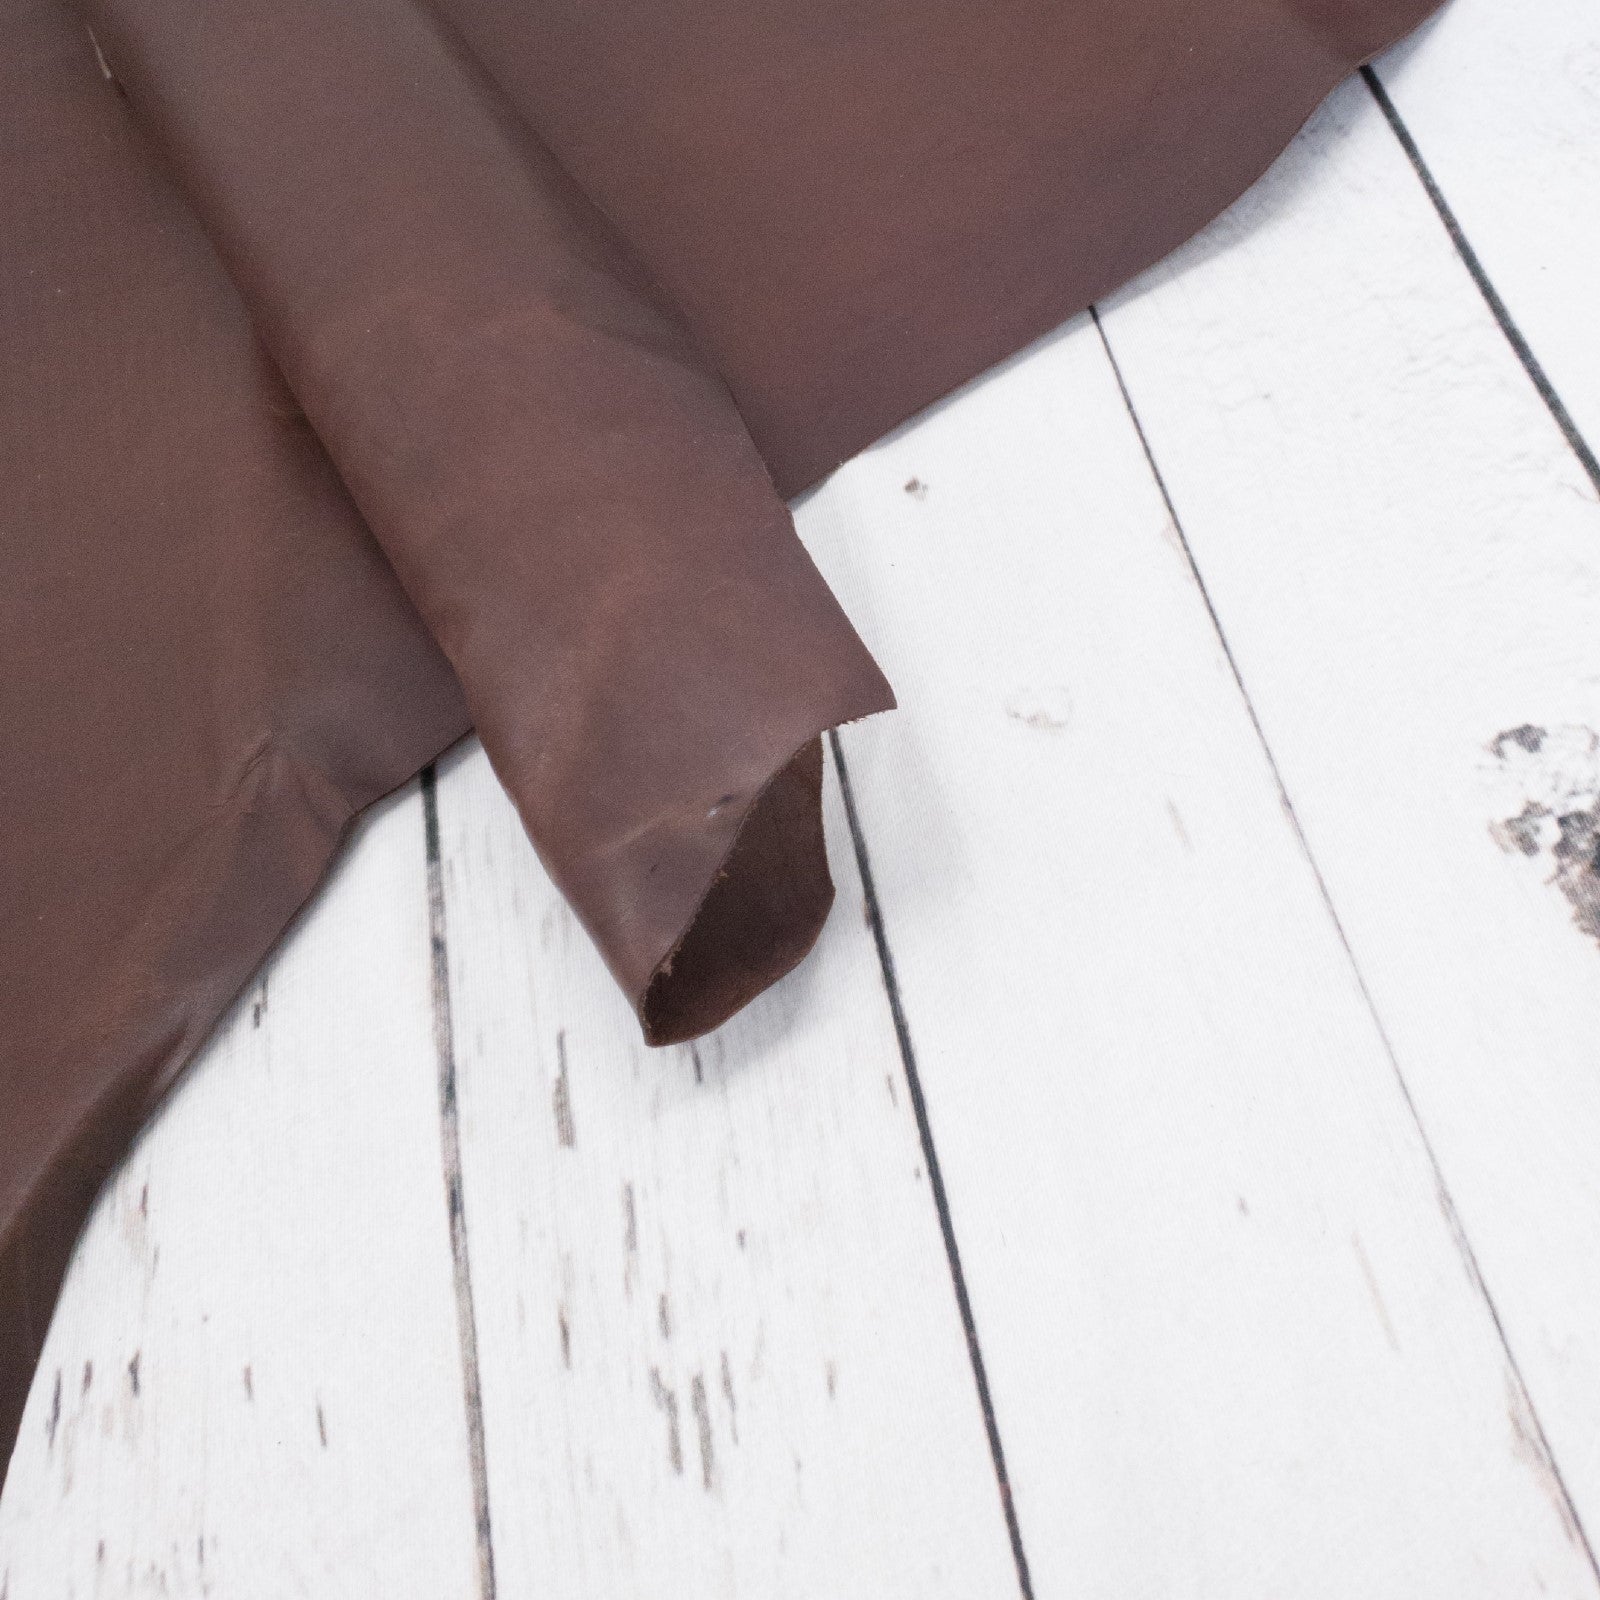 Kangaroo Chocolate Dyed Veg Tanned 5 - 7 Sq Ft Hides 2-3 oz,  | The Leather Guy